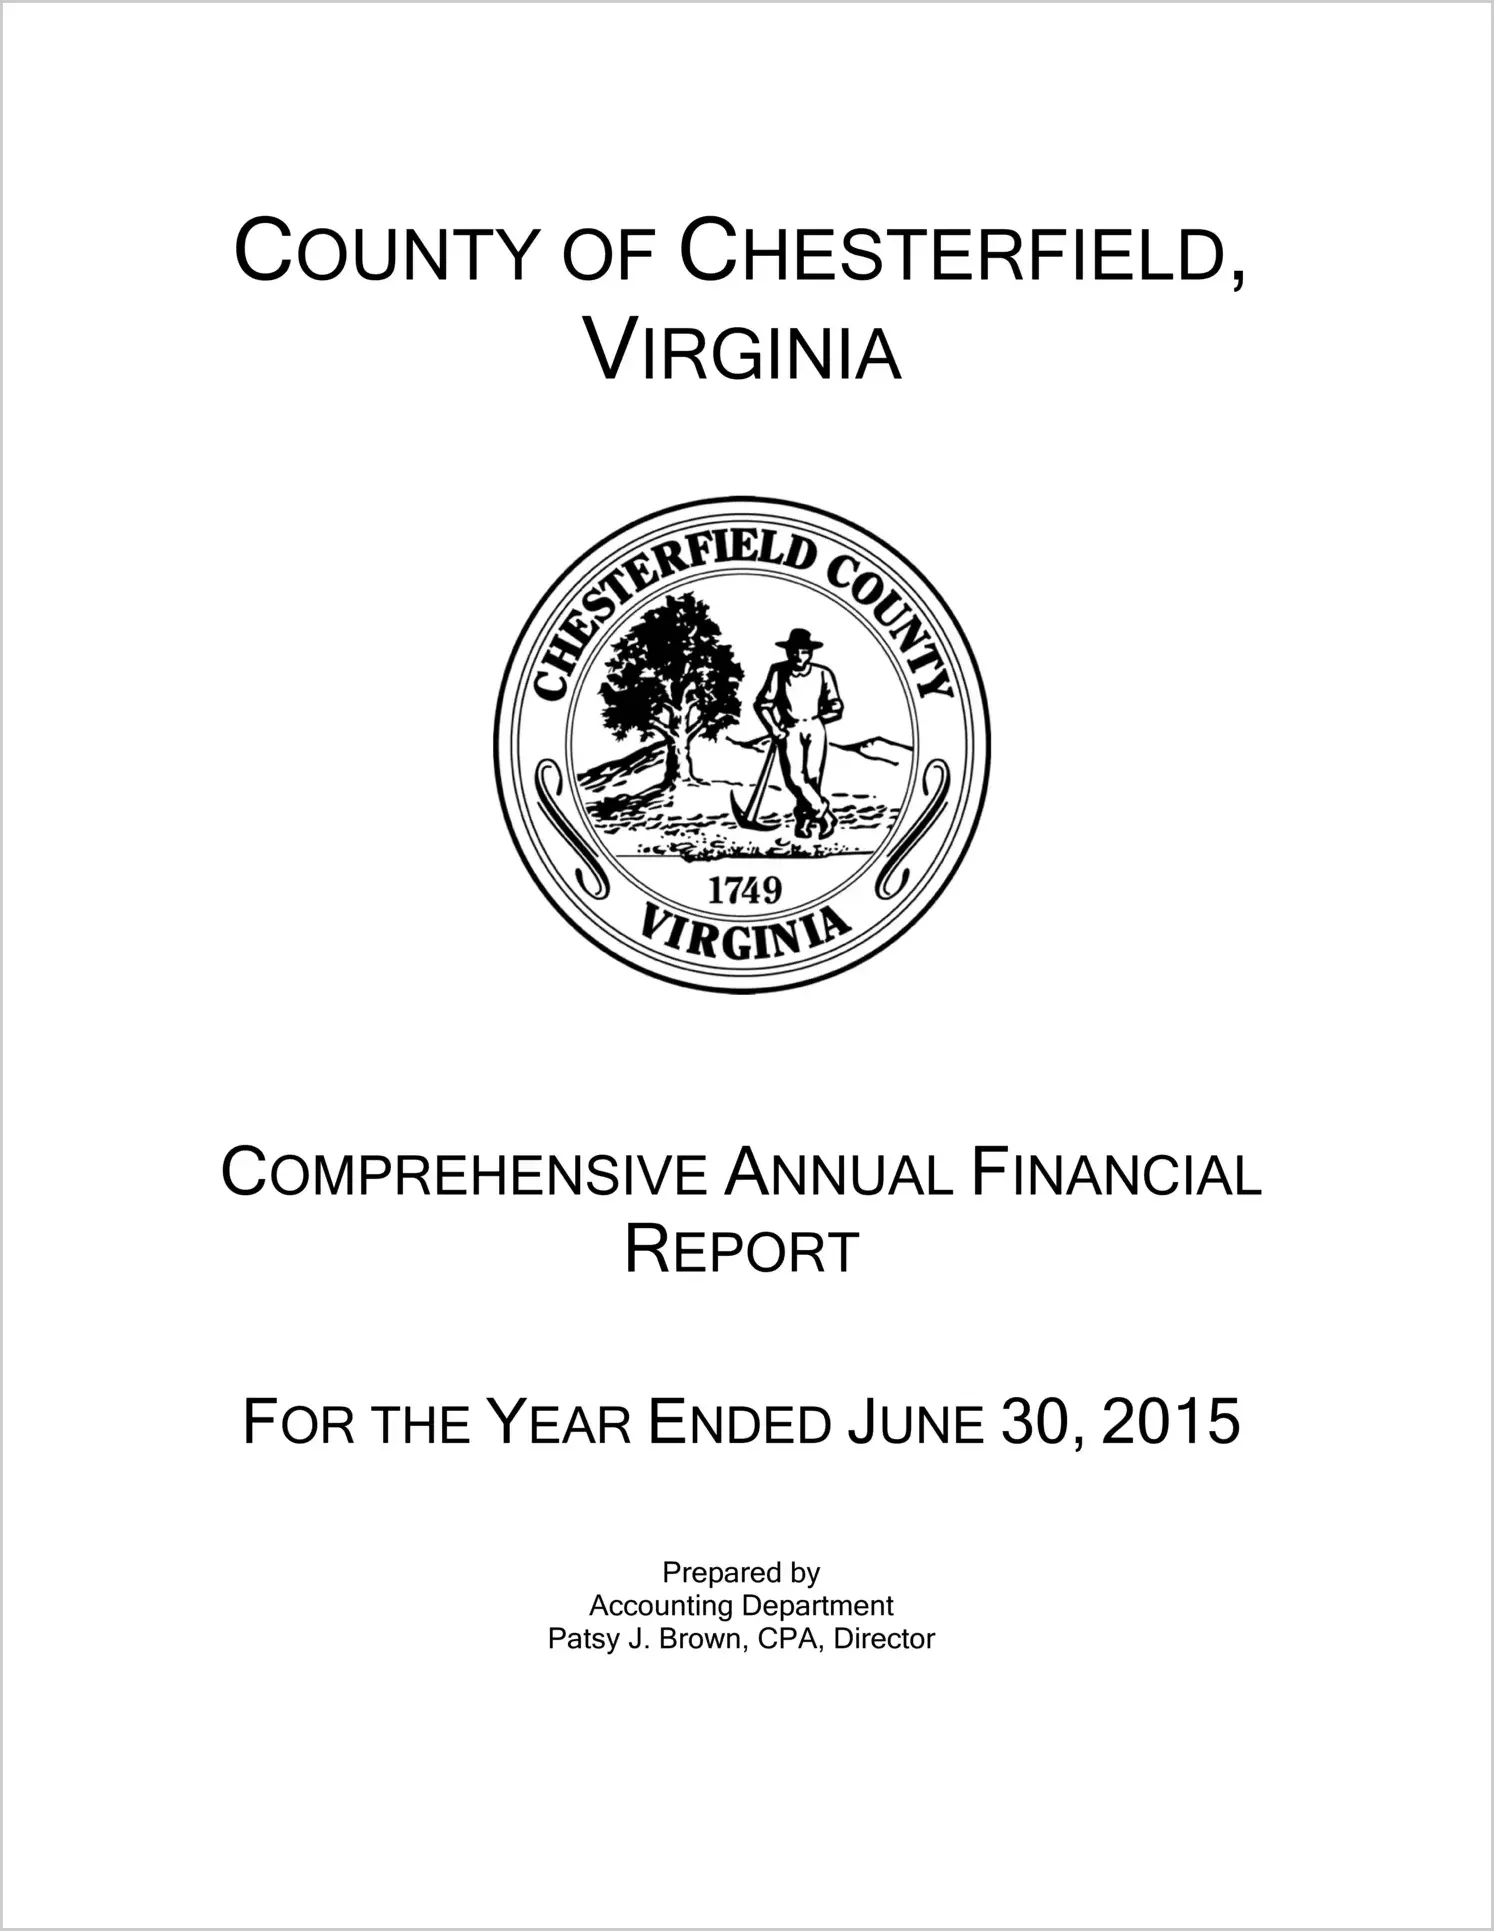 2015 Annual Financial Report for County of Chesterfield